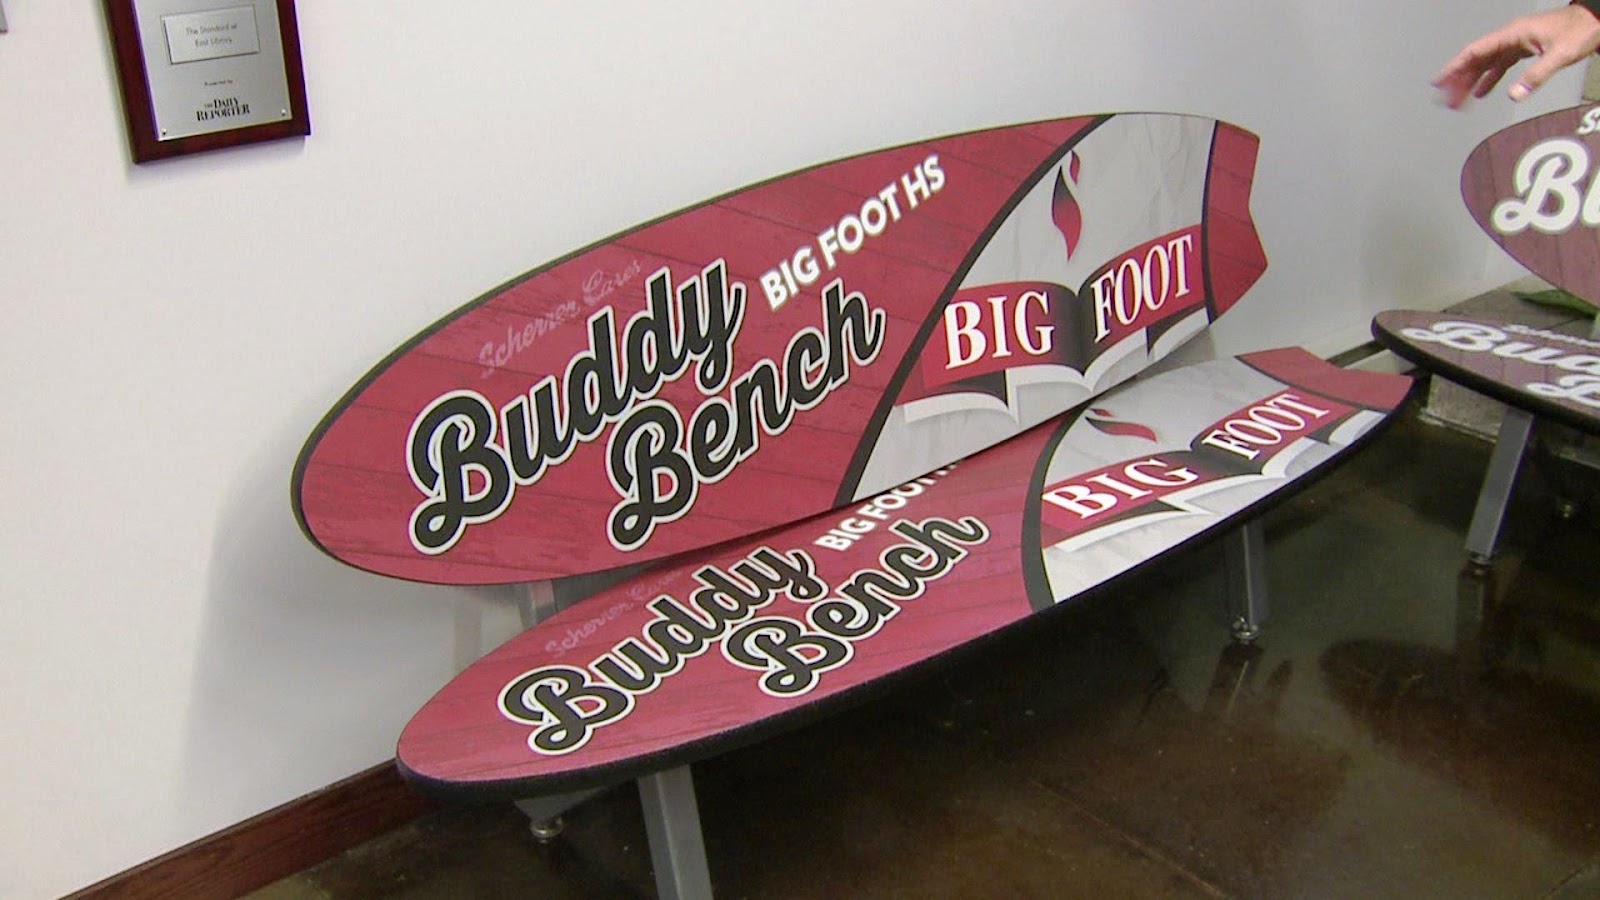 The Buddy Bench Project